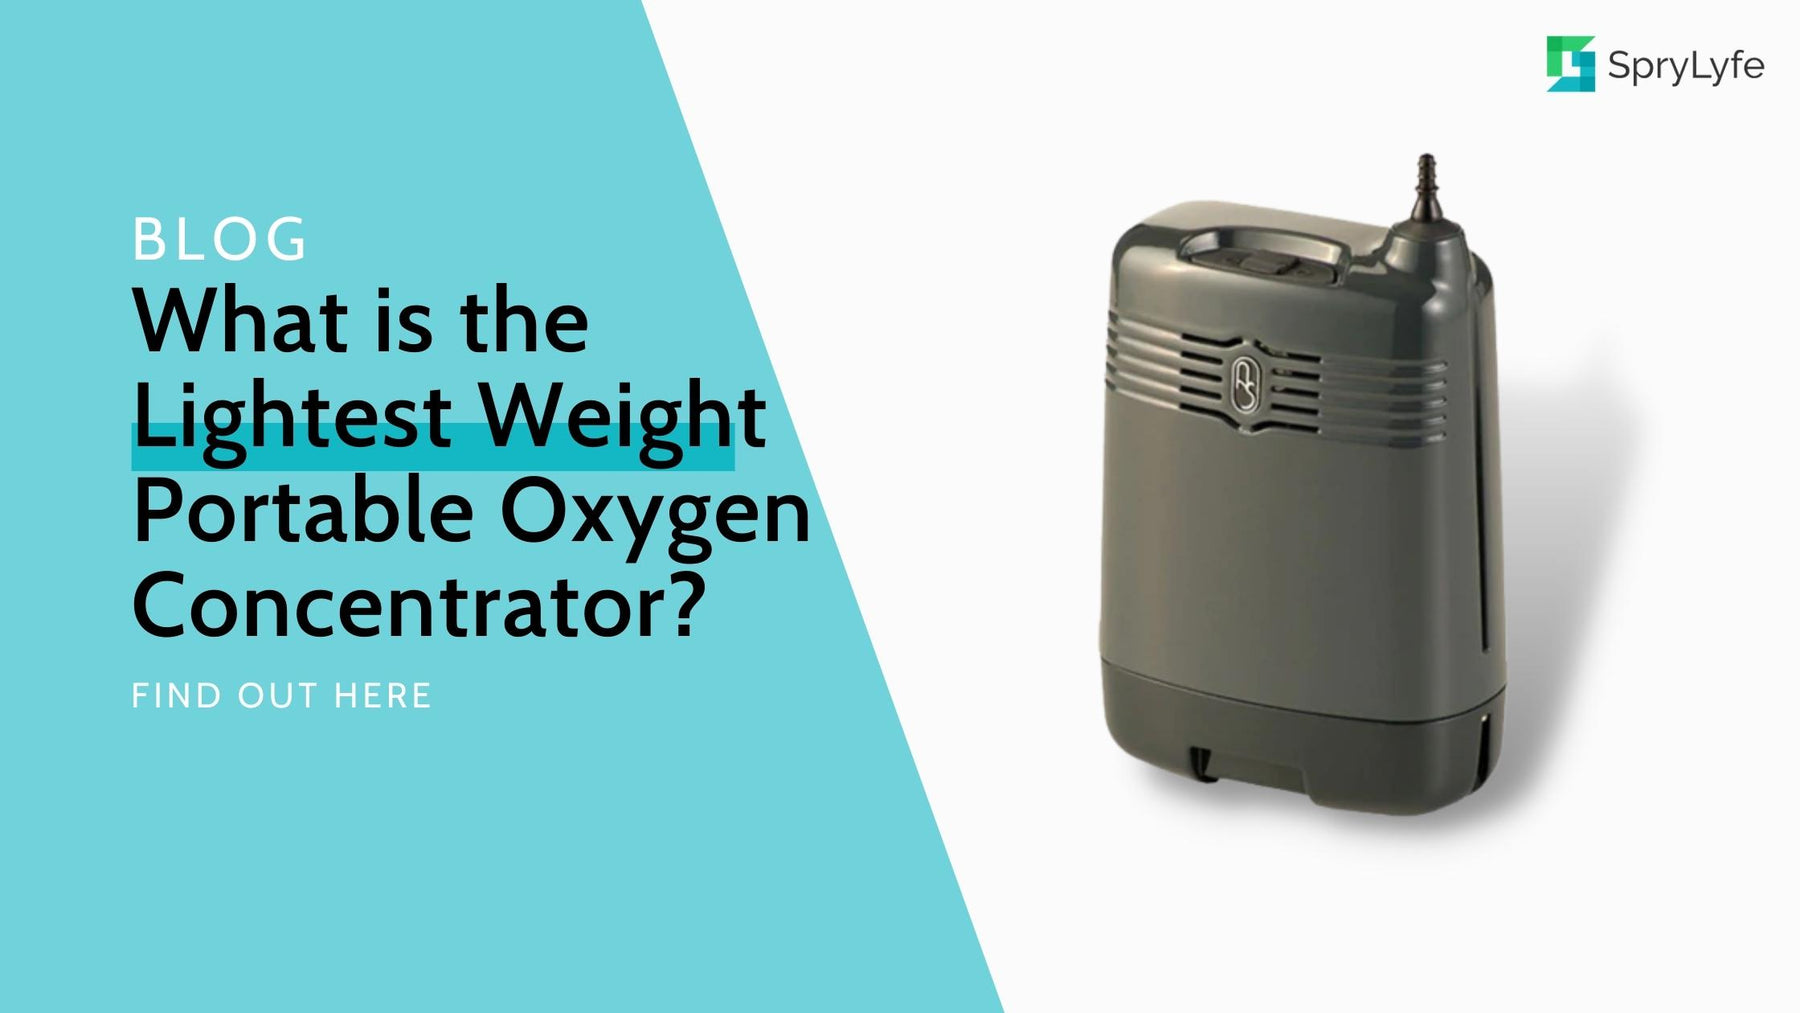 What Is the Lightest Weight Portable Oxygen Concentrator in 2023?